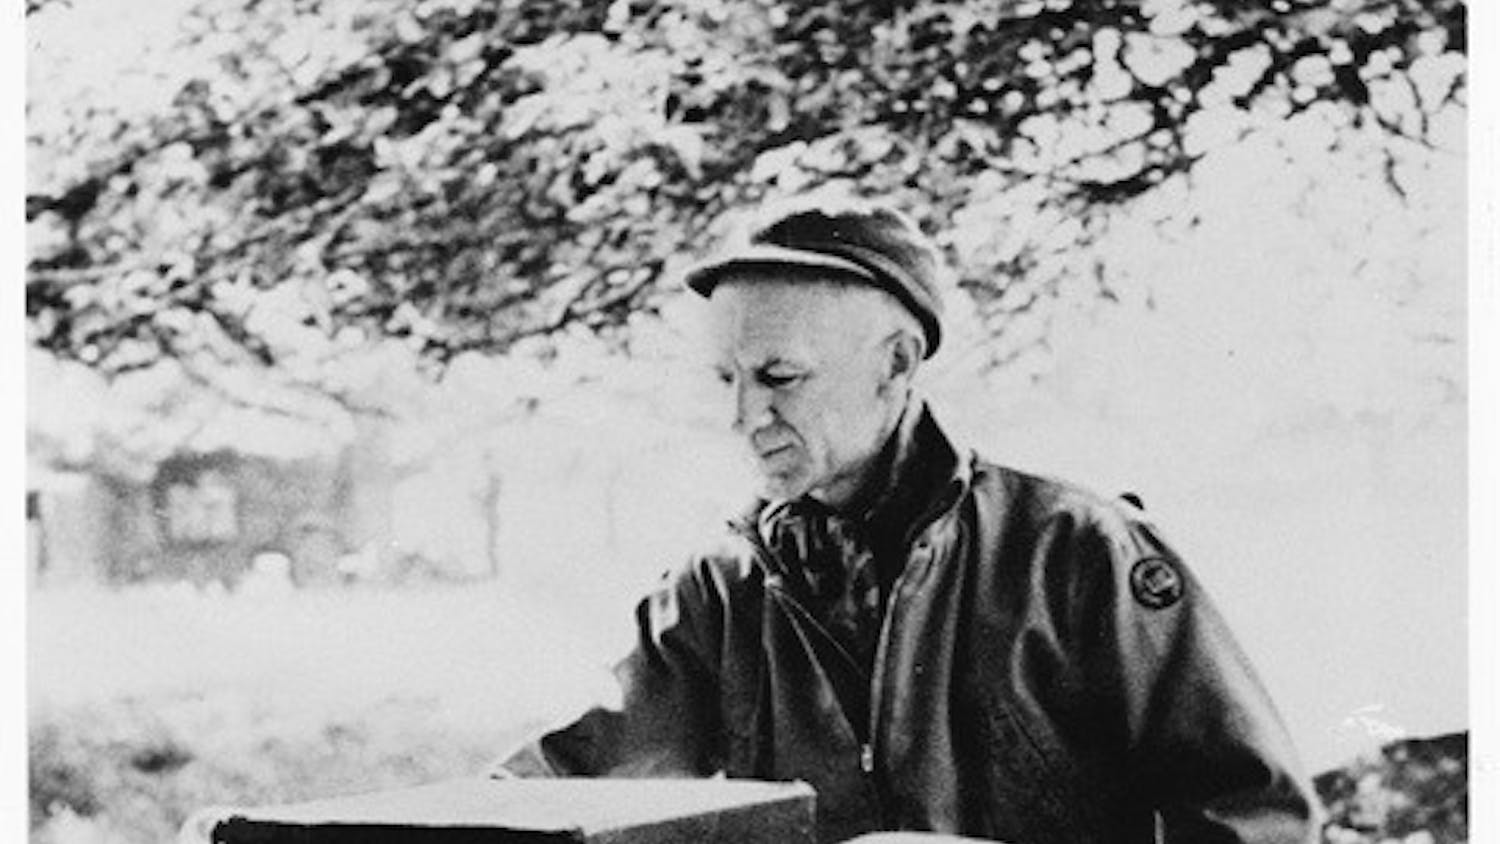 The 70th anniversary of Ernie Pyle's death was commemorated Saturday. Pyle was a journalism student at IU and was also a war correspondent during World War II.